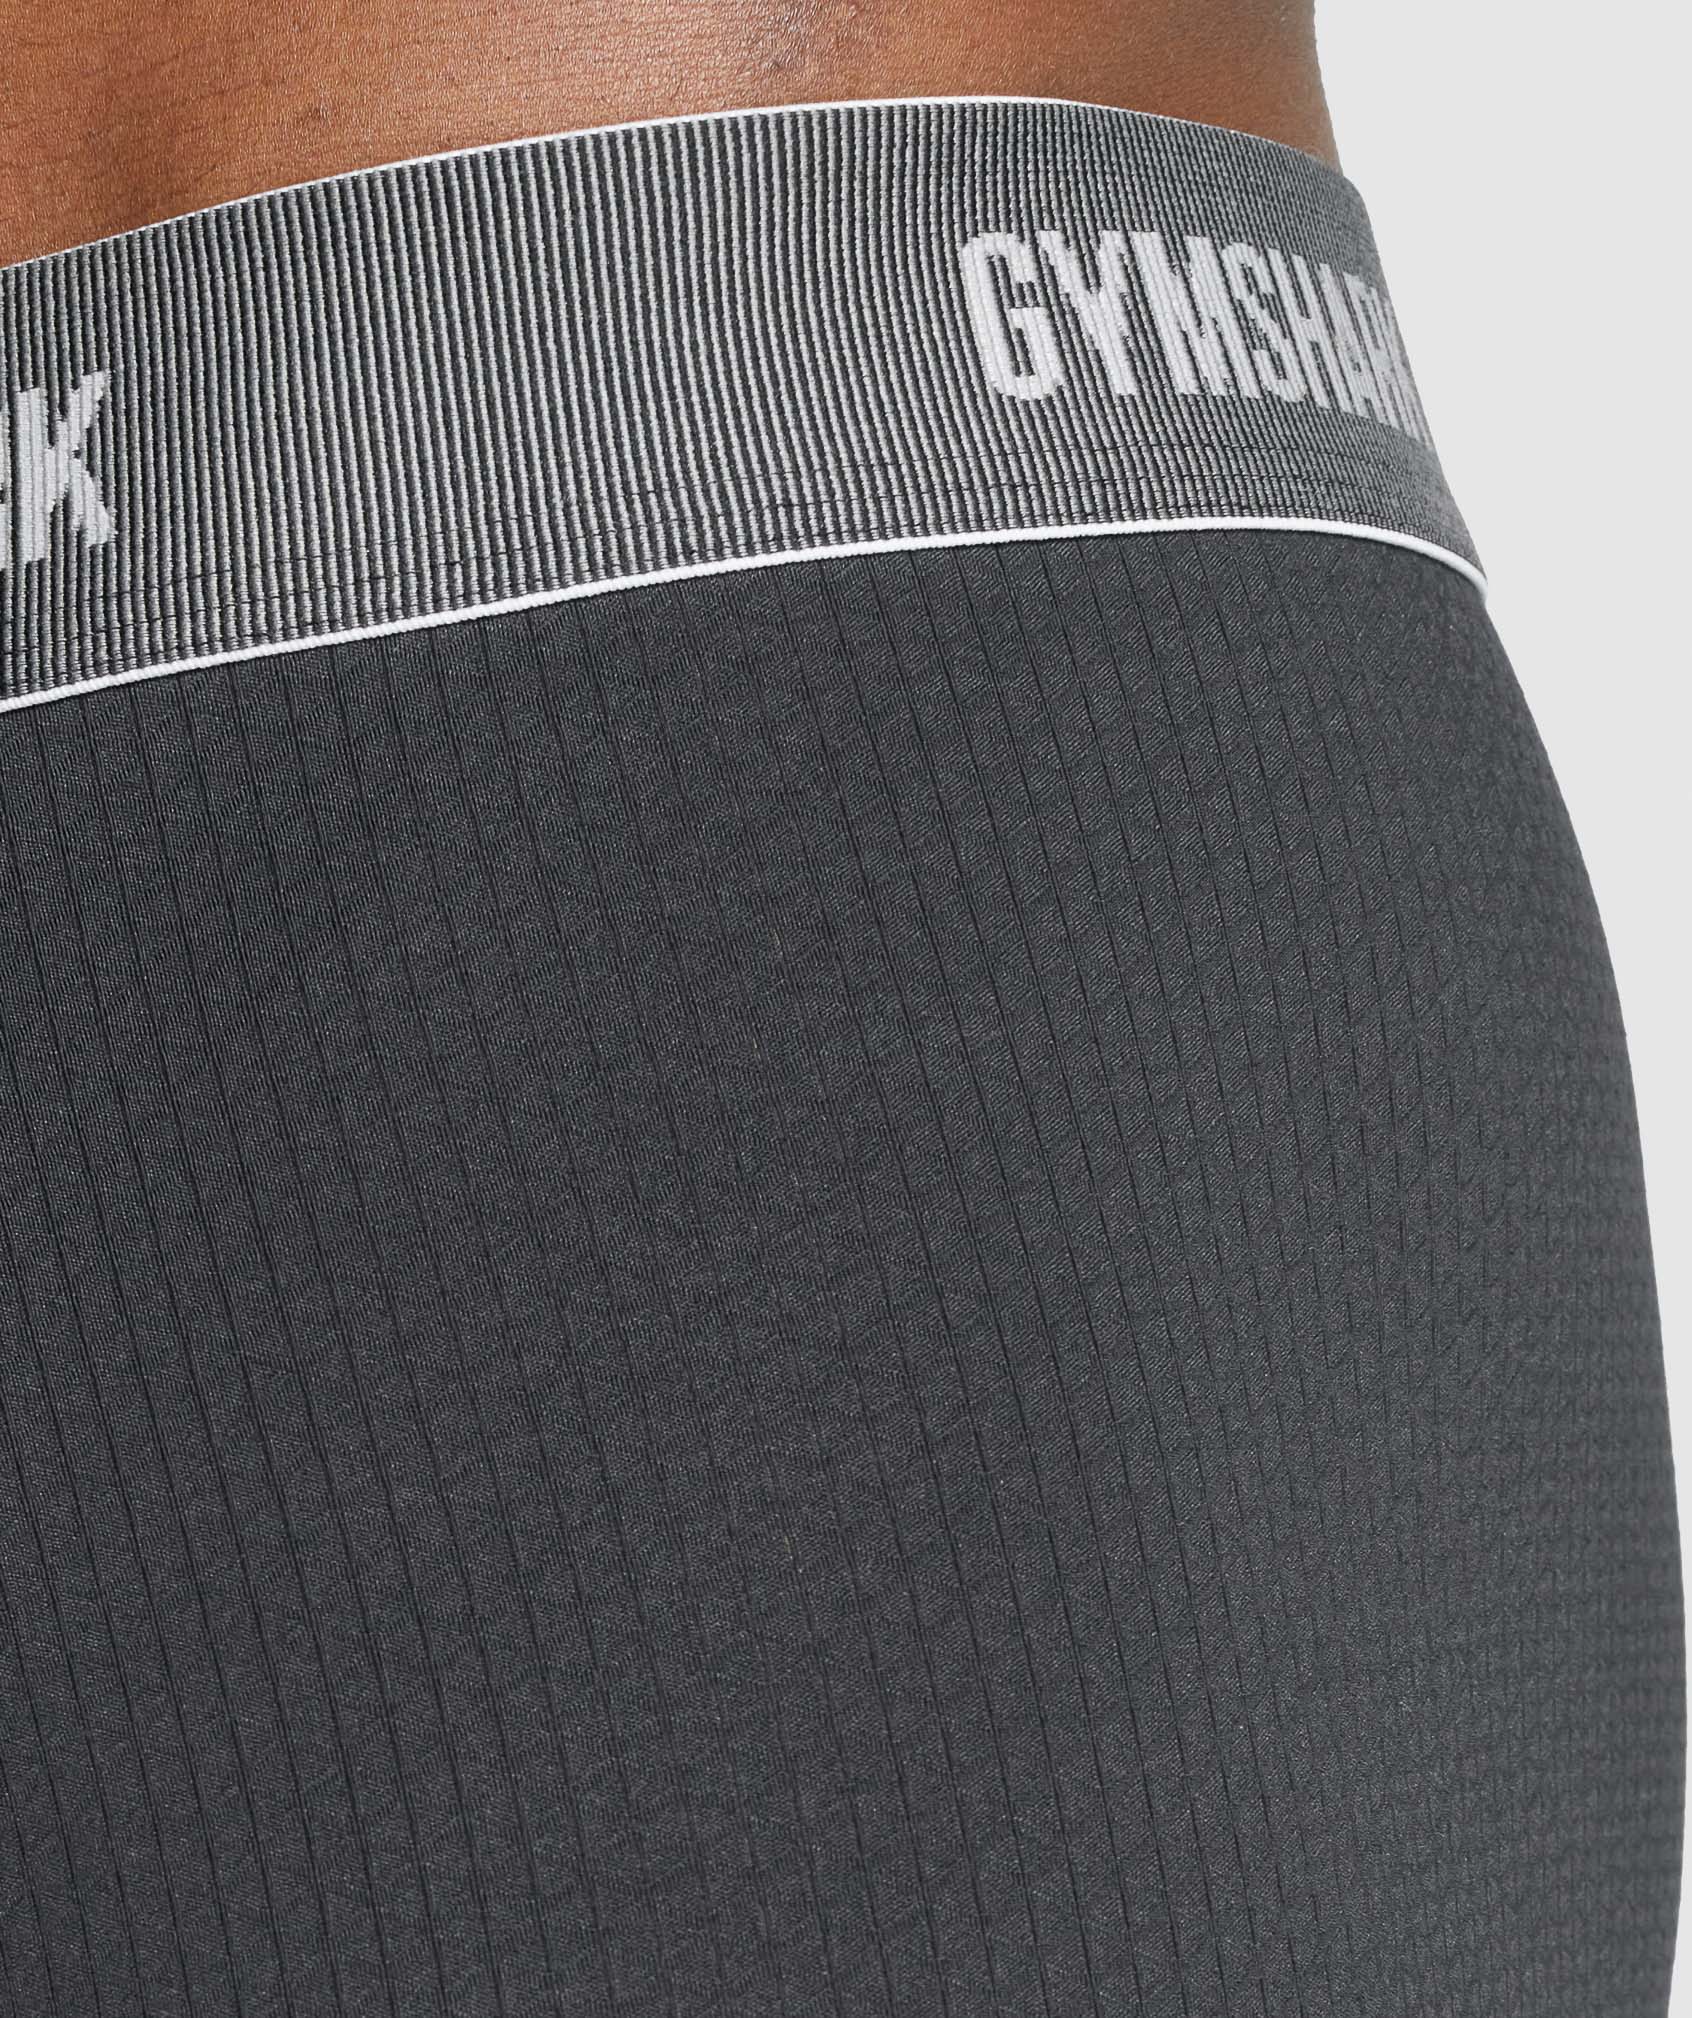 GYMSHARK Men's Essential High-Thigh Trunk Boxers 2 Pack, Black